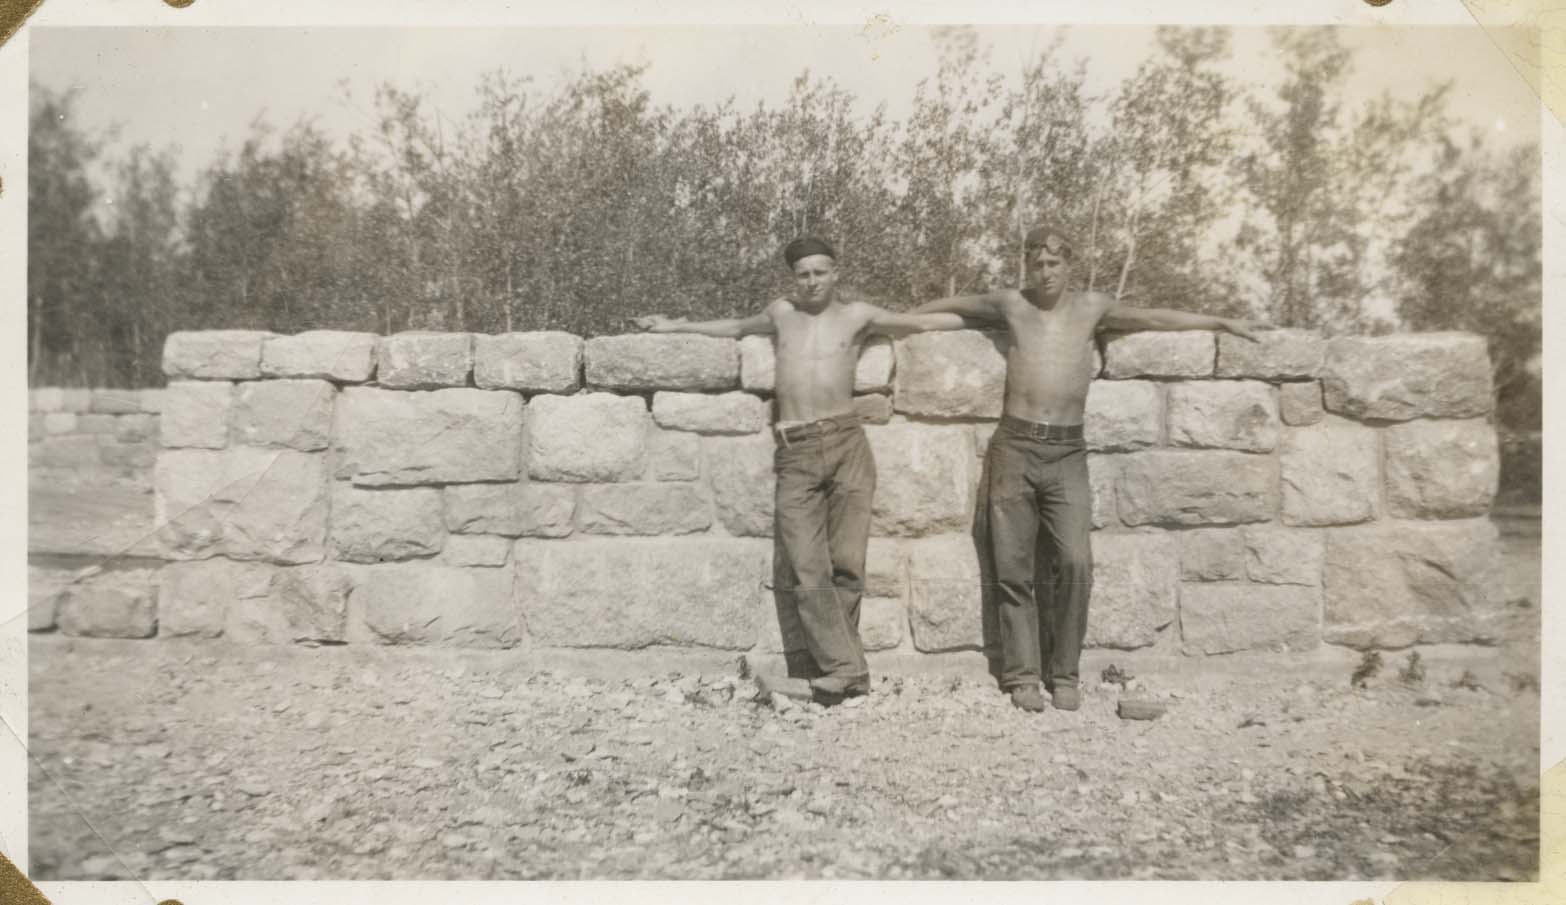 Two members of the Civilian Conservation Corps (CCC) Company 794 stand next to stone wall, International Peace Garden